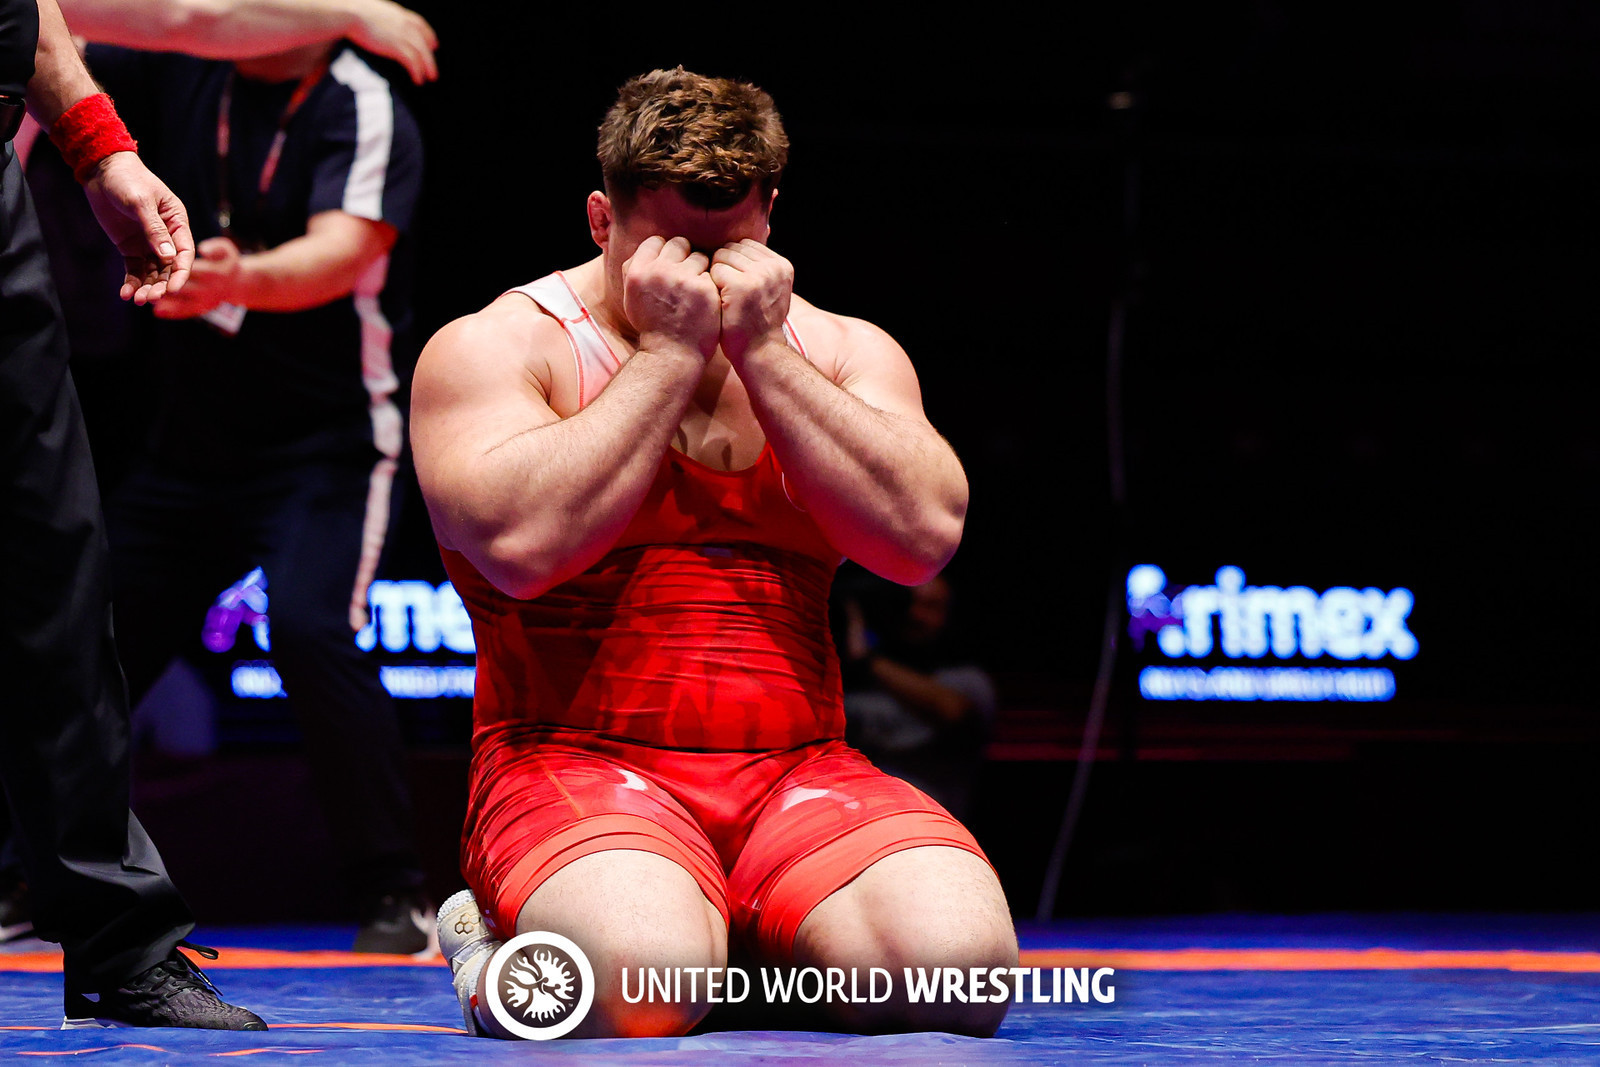 Riza Kayaalp was very upset after his final bout. UWW